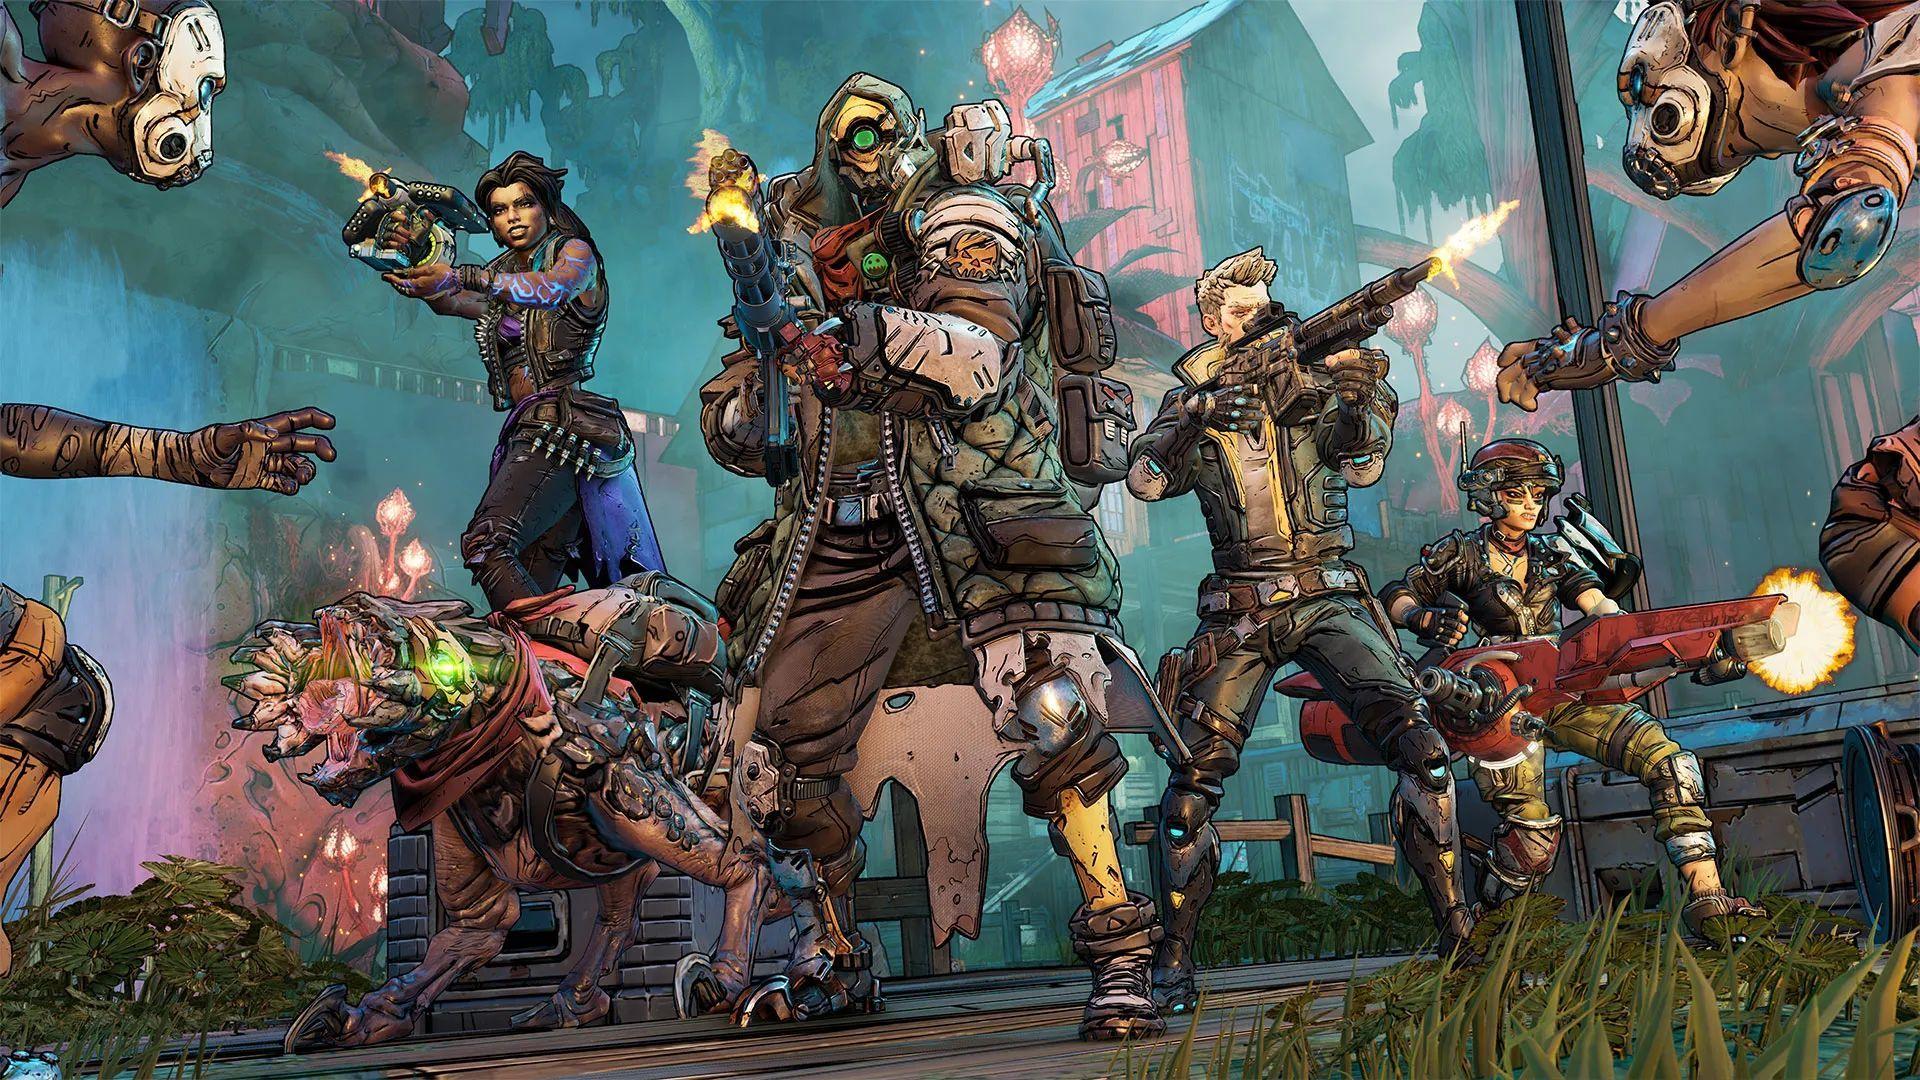 Gearbox Reveals Two New Skill Trees From Upcoming Designer’s Cut DLC